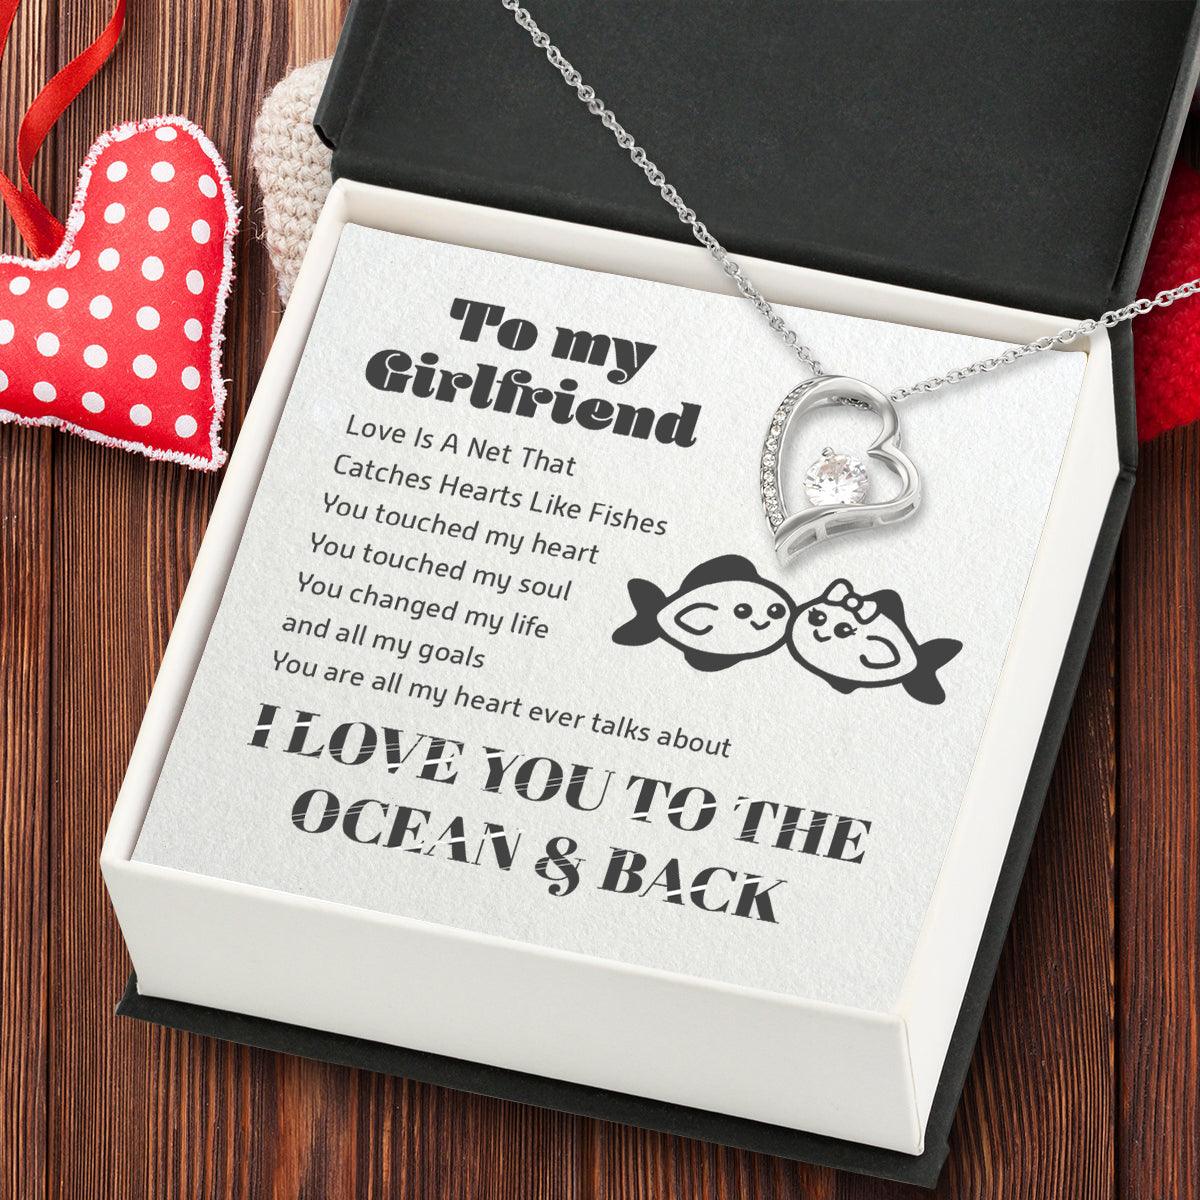 Forever Love Necklace - Fishing - To My Girlfriend - I Love You To The Ocean & Back - Ausnr13012 - Gifts Holder